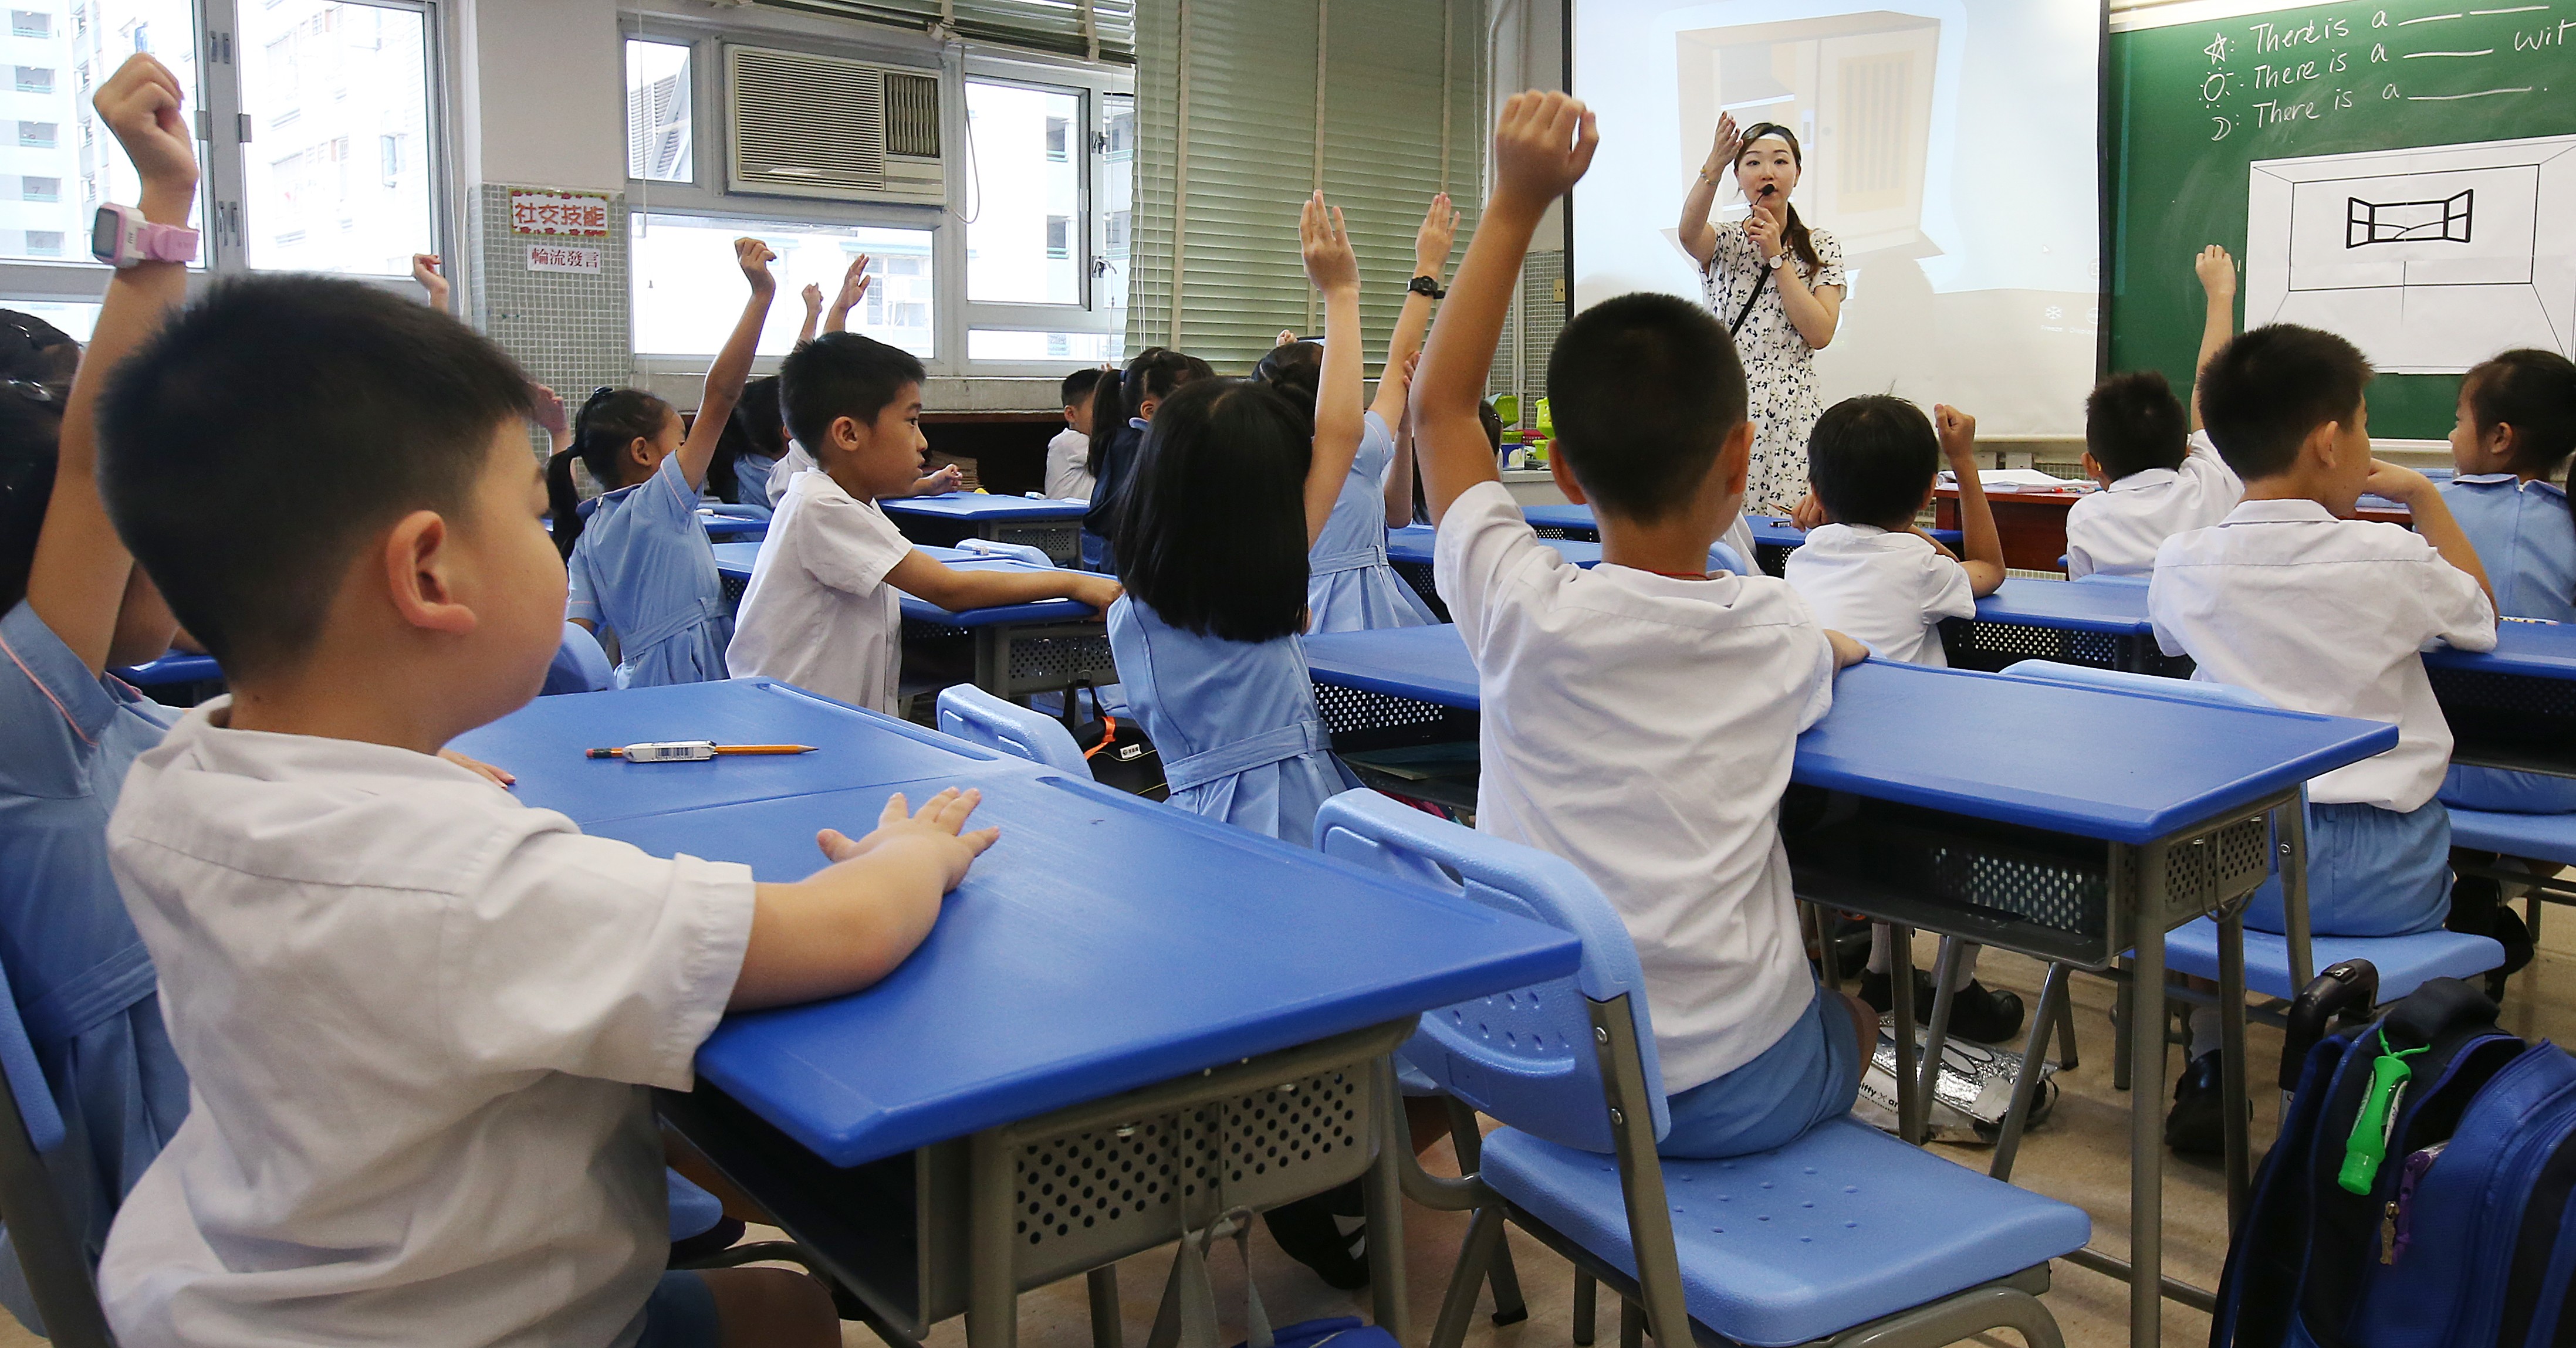 Teacher in a class at GCCITKD Cheong Wong Wai Primary School in Sha Tin. More than 10 per cent of the 630 pupils in the school have special educational needs ranging from autism to attention deficit hyperactivity disorder. David Wong